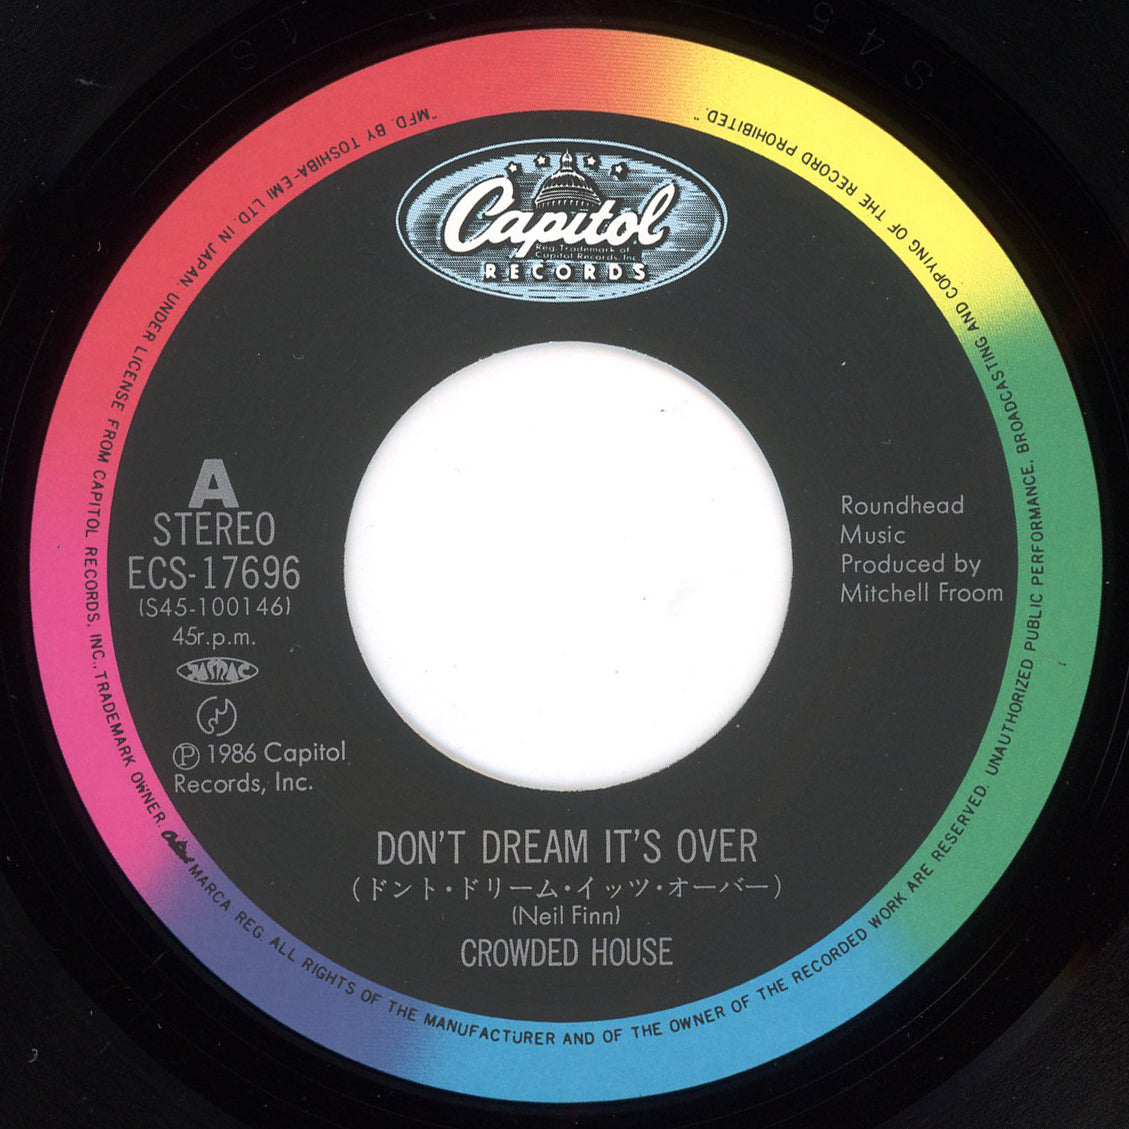 Crowded House - Don't Dream It's Over / That's What I Call Love 7"